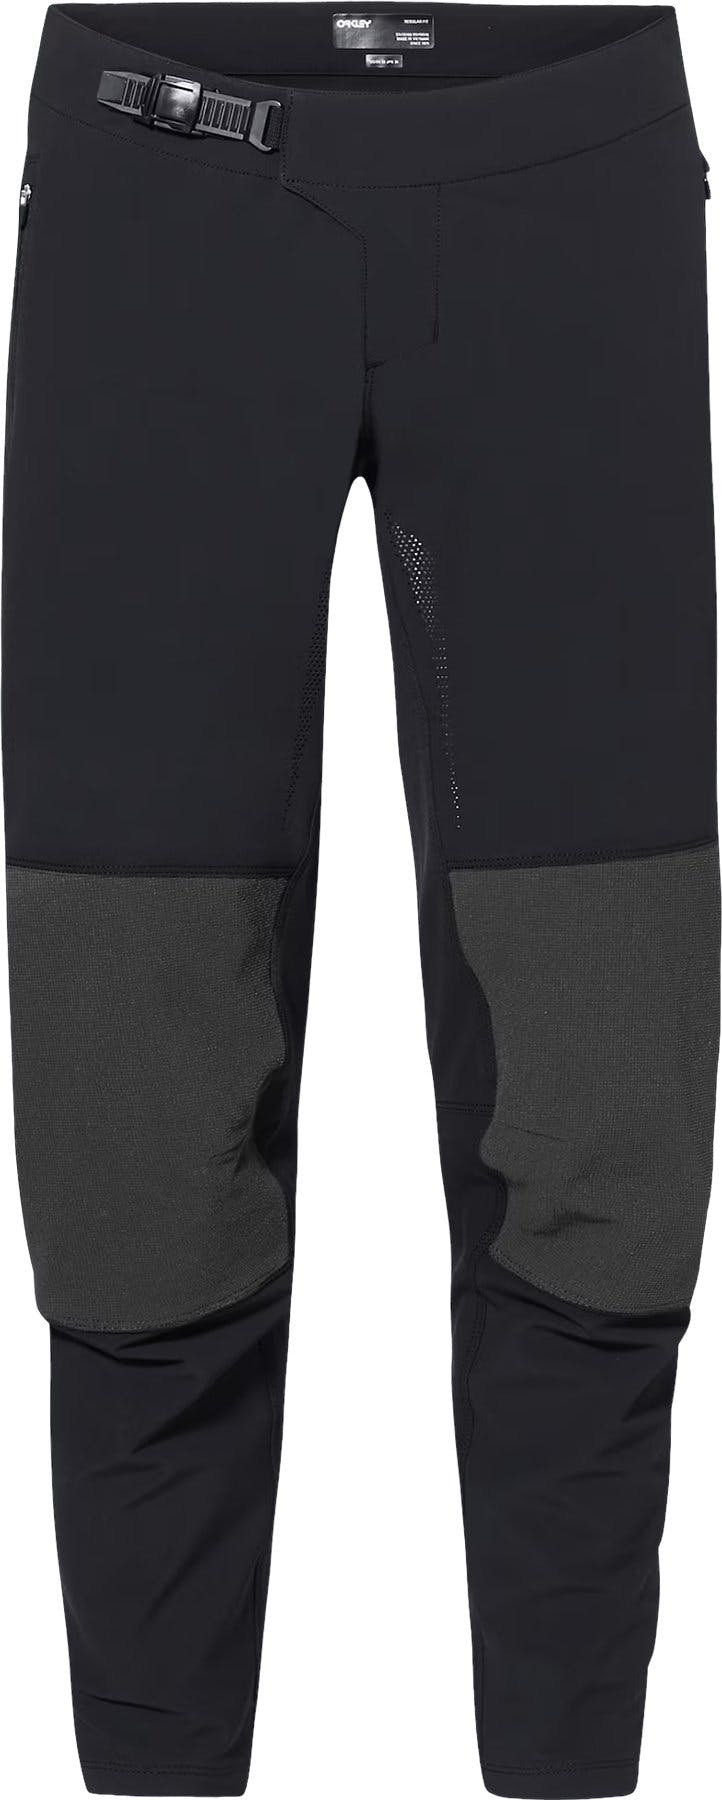 Product image for MTB Long Pant - Men's